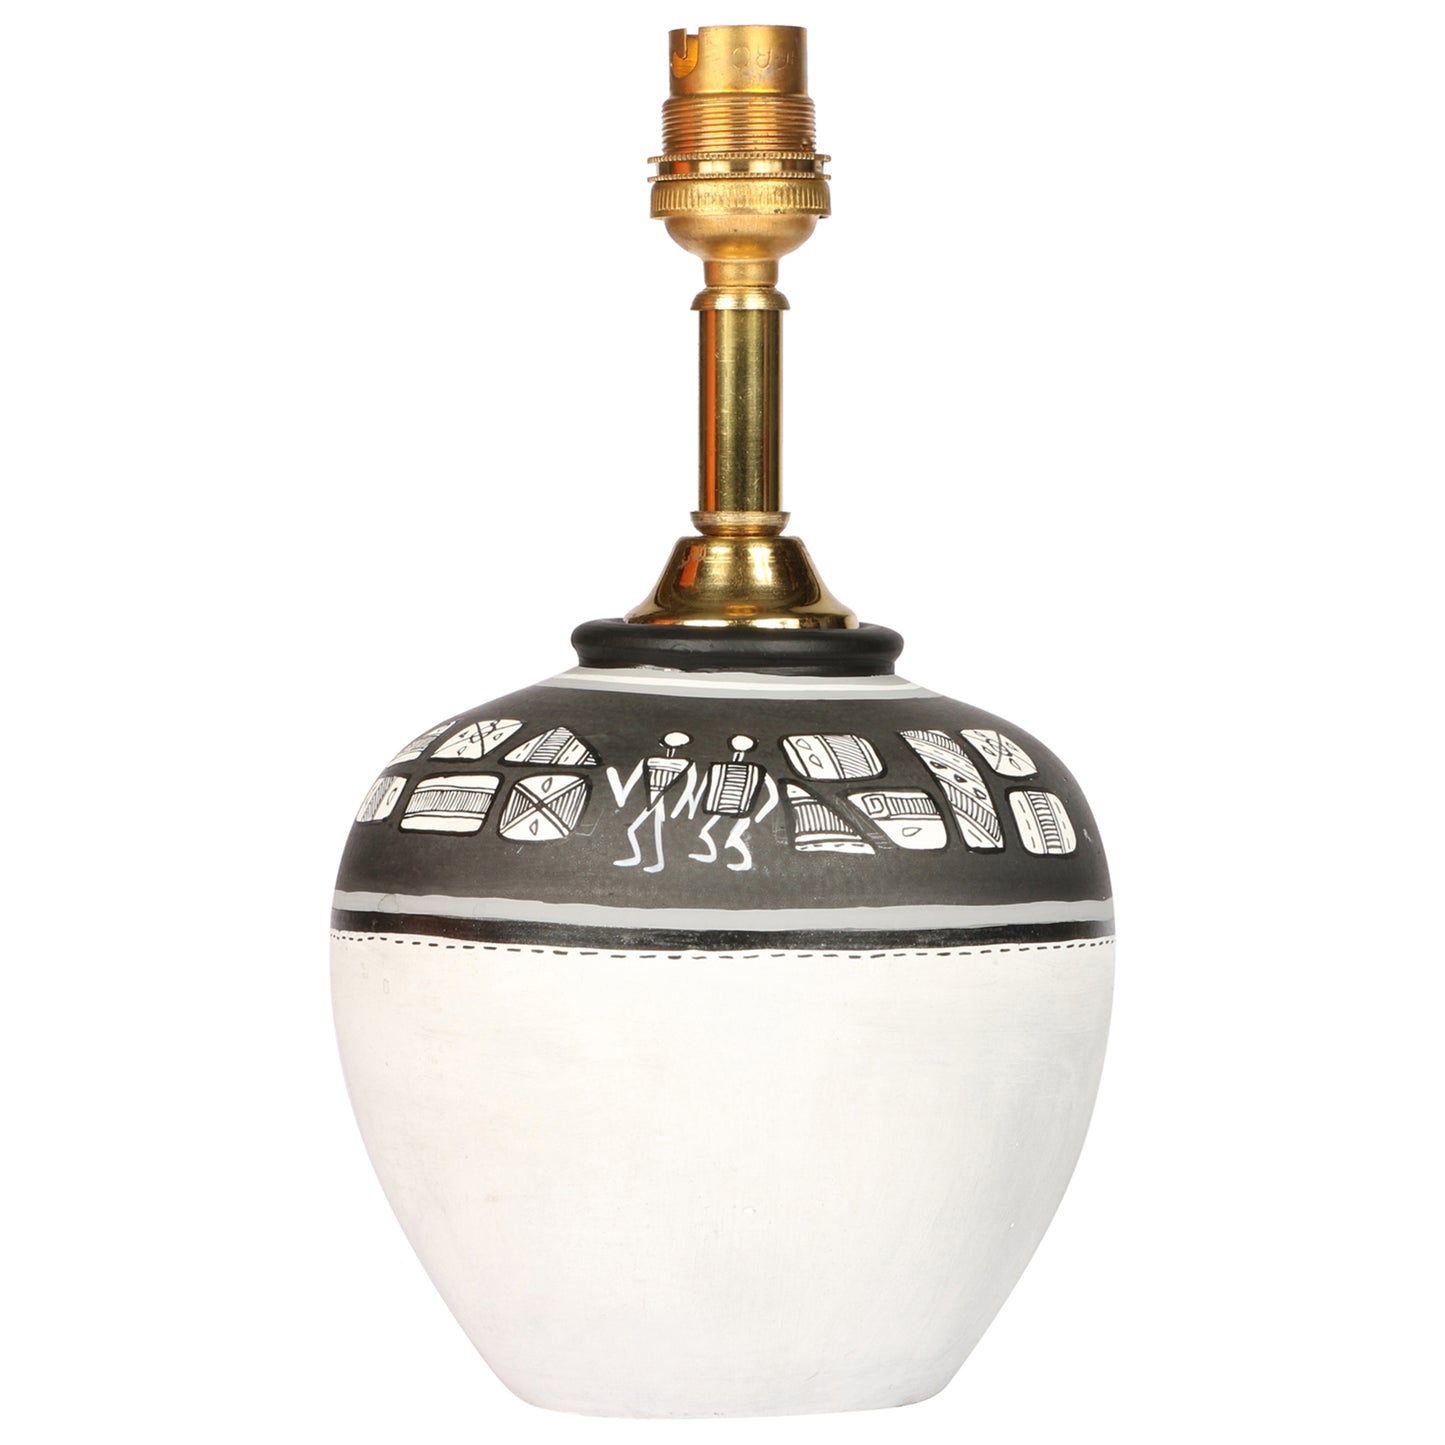 Table Lamp Earthen Handcrafted with White Shade (8.1x12.6)